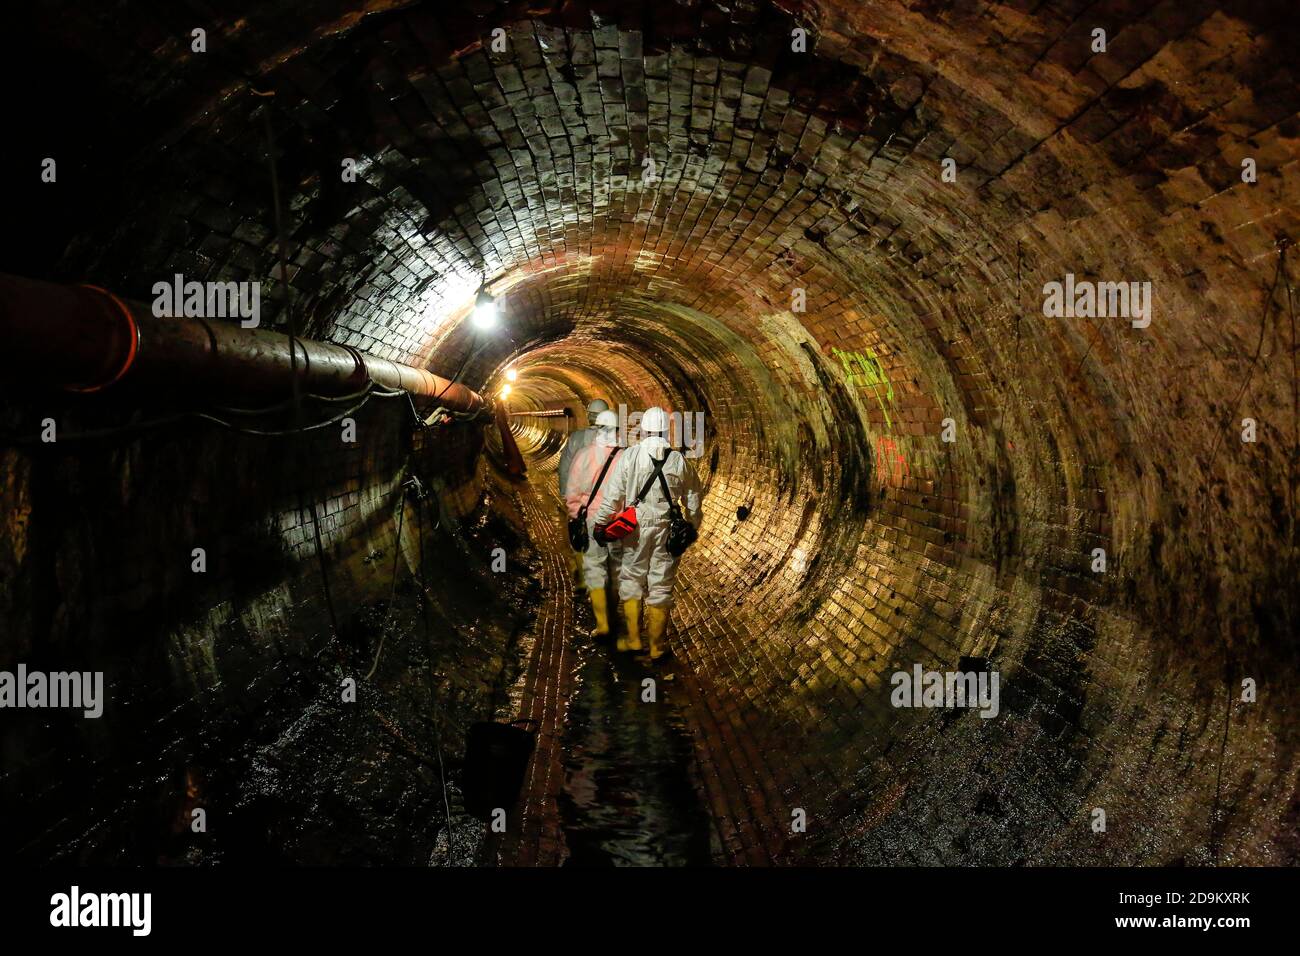 Ruhr area, North Rhine-Westphalia, Germany, sewer network transmission, inspection of an old, brick-built sewer in need of rehabilitation. Stock Photo